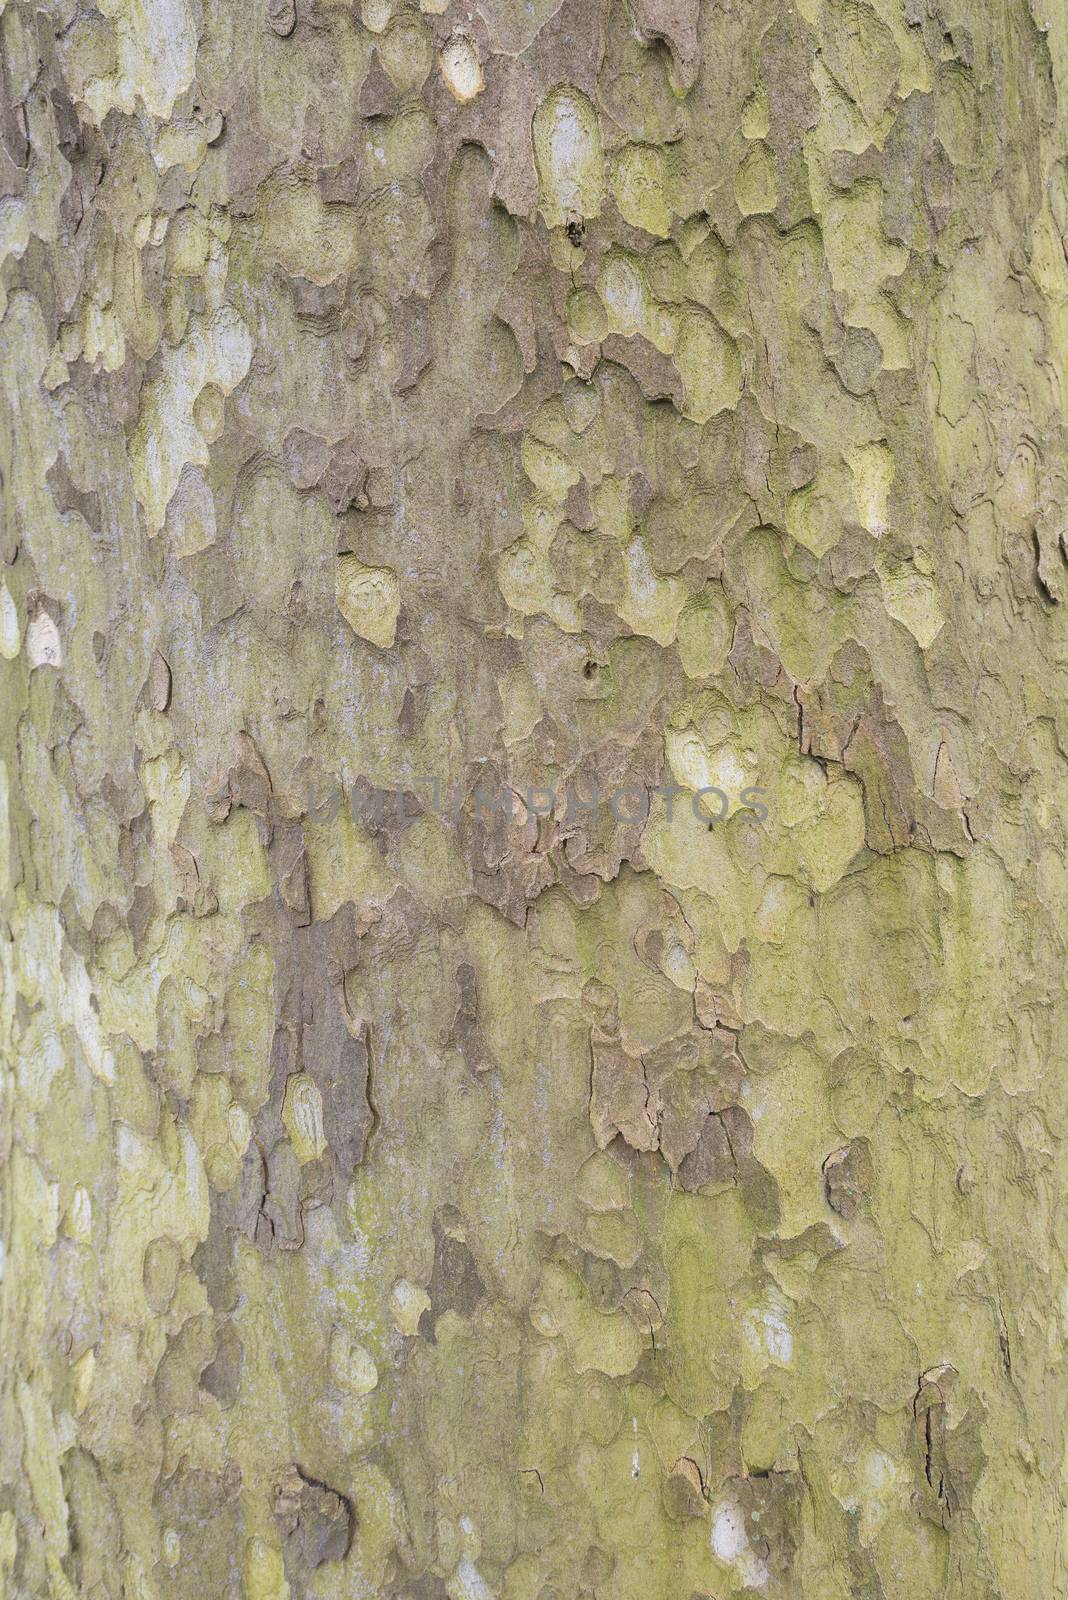 Tree bark of a Sycamore with beautiful textures and colors
